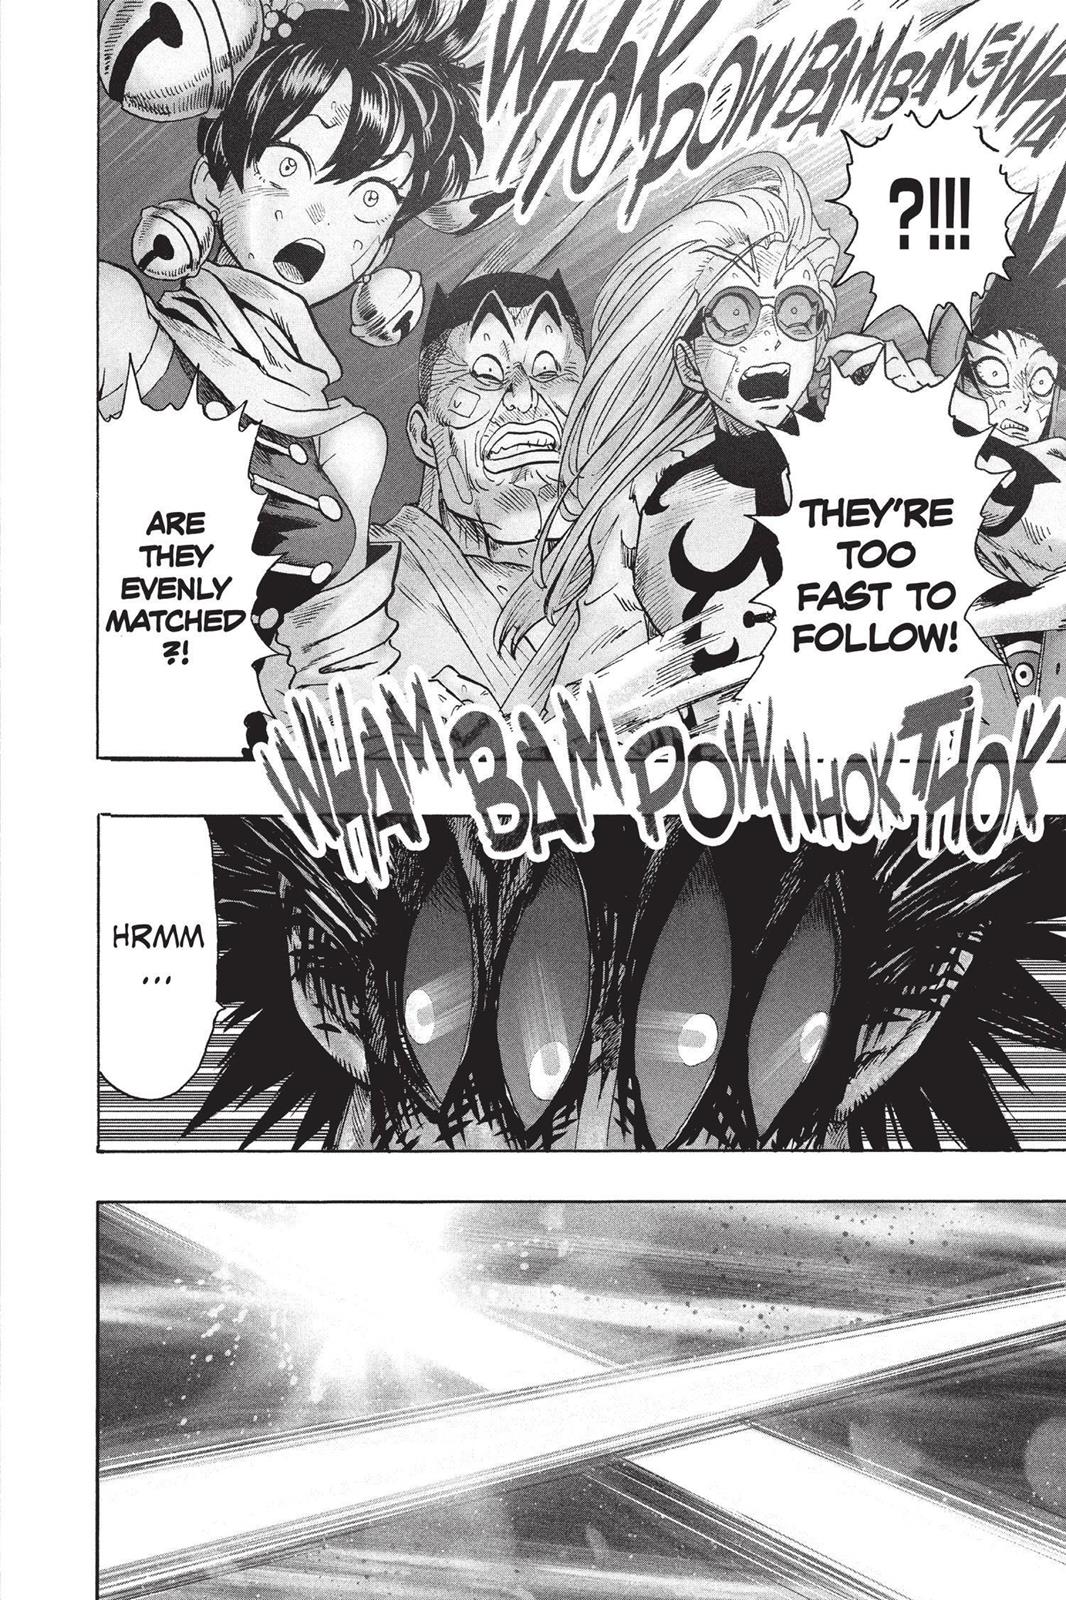 One-Punch Man, Punch 72 image 60